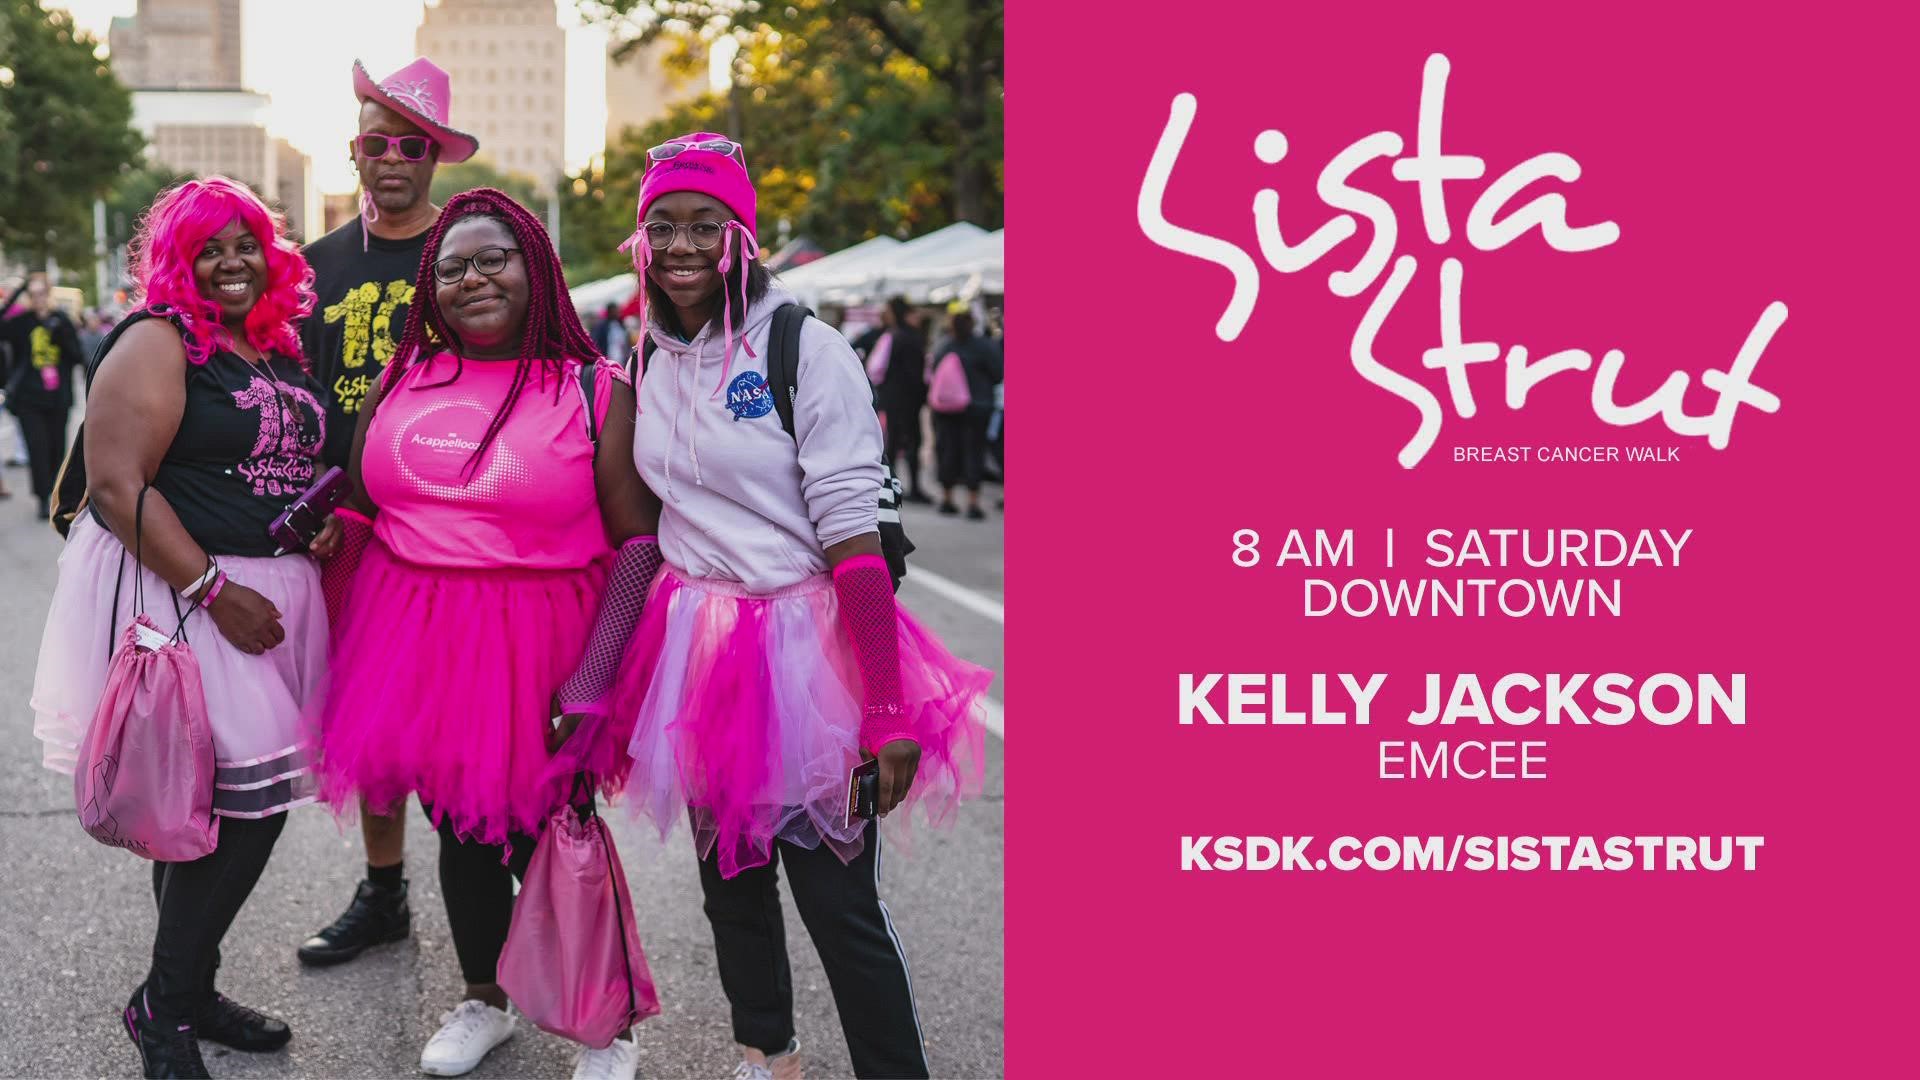 2022 marks 13 years of Sista Strut in St. Louis. 5 On Your Side's Kelly Jackson is emceeing the 3k walk and parade this weekend.